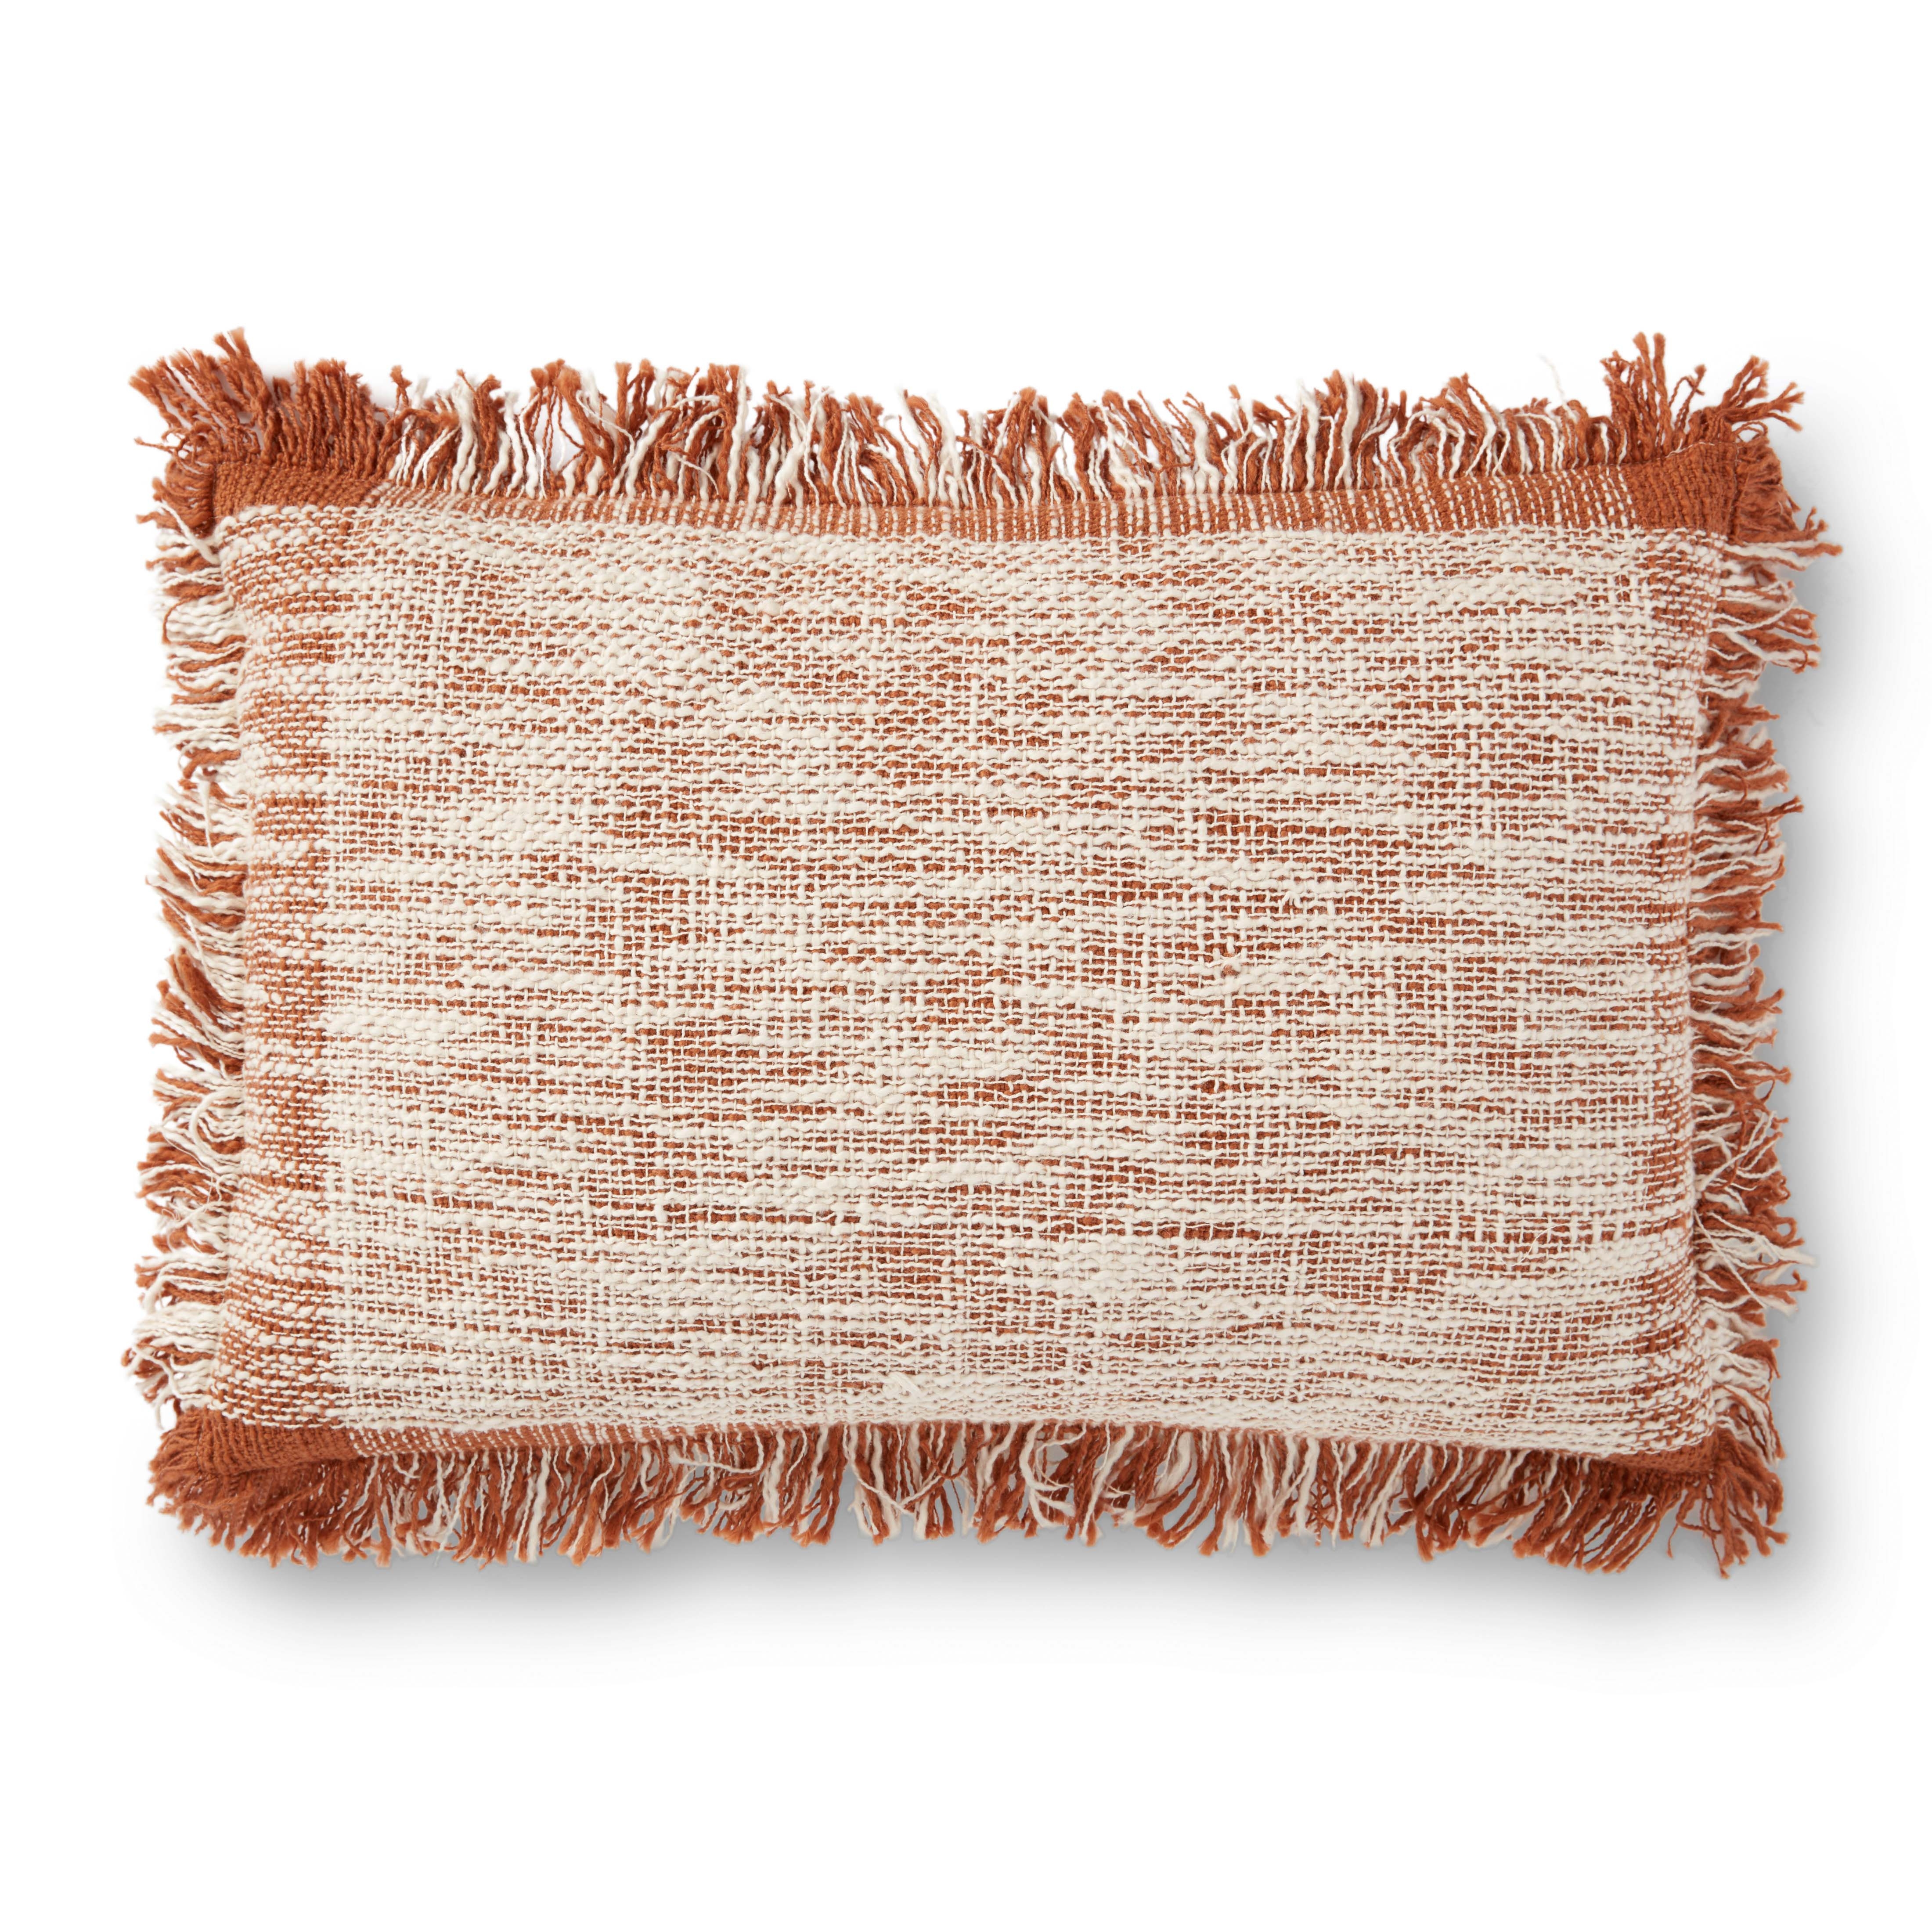 PILLOWS P0938 RUST / NATURAL 16" x 26" Cover Only - Image 0